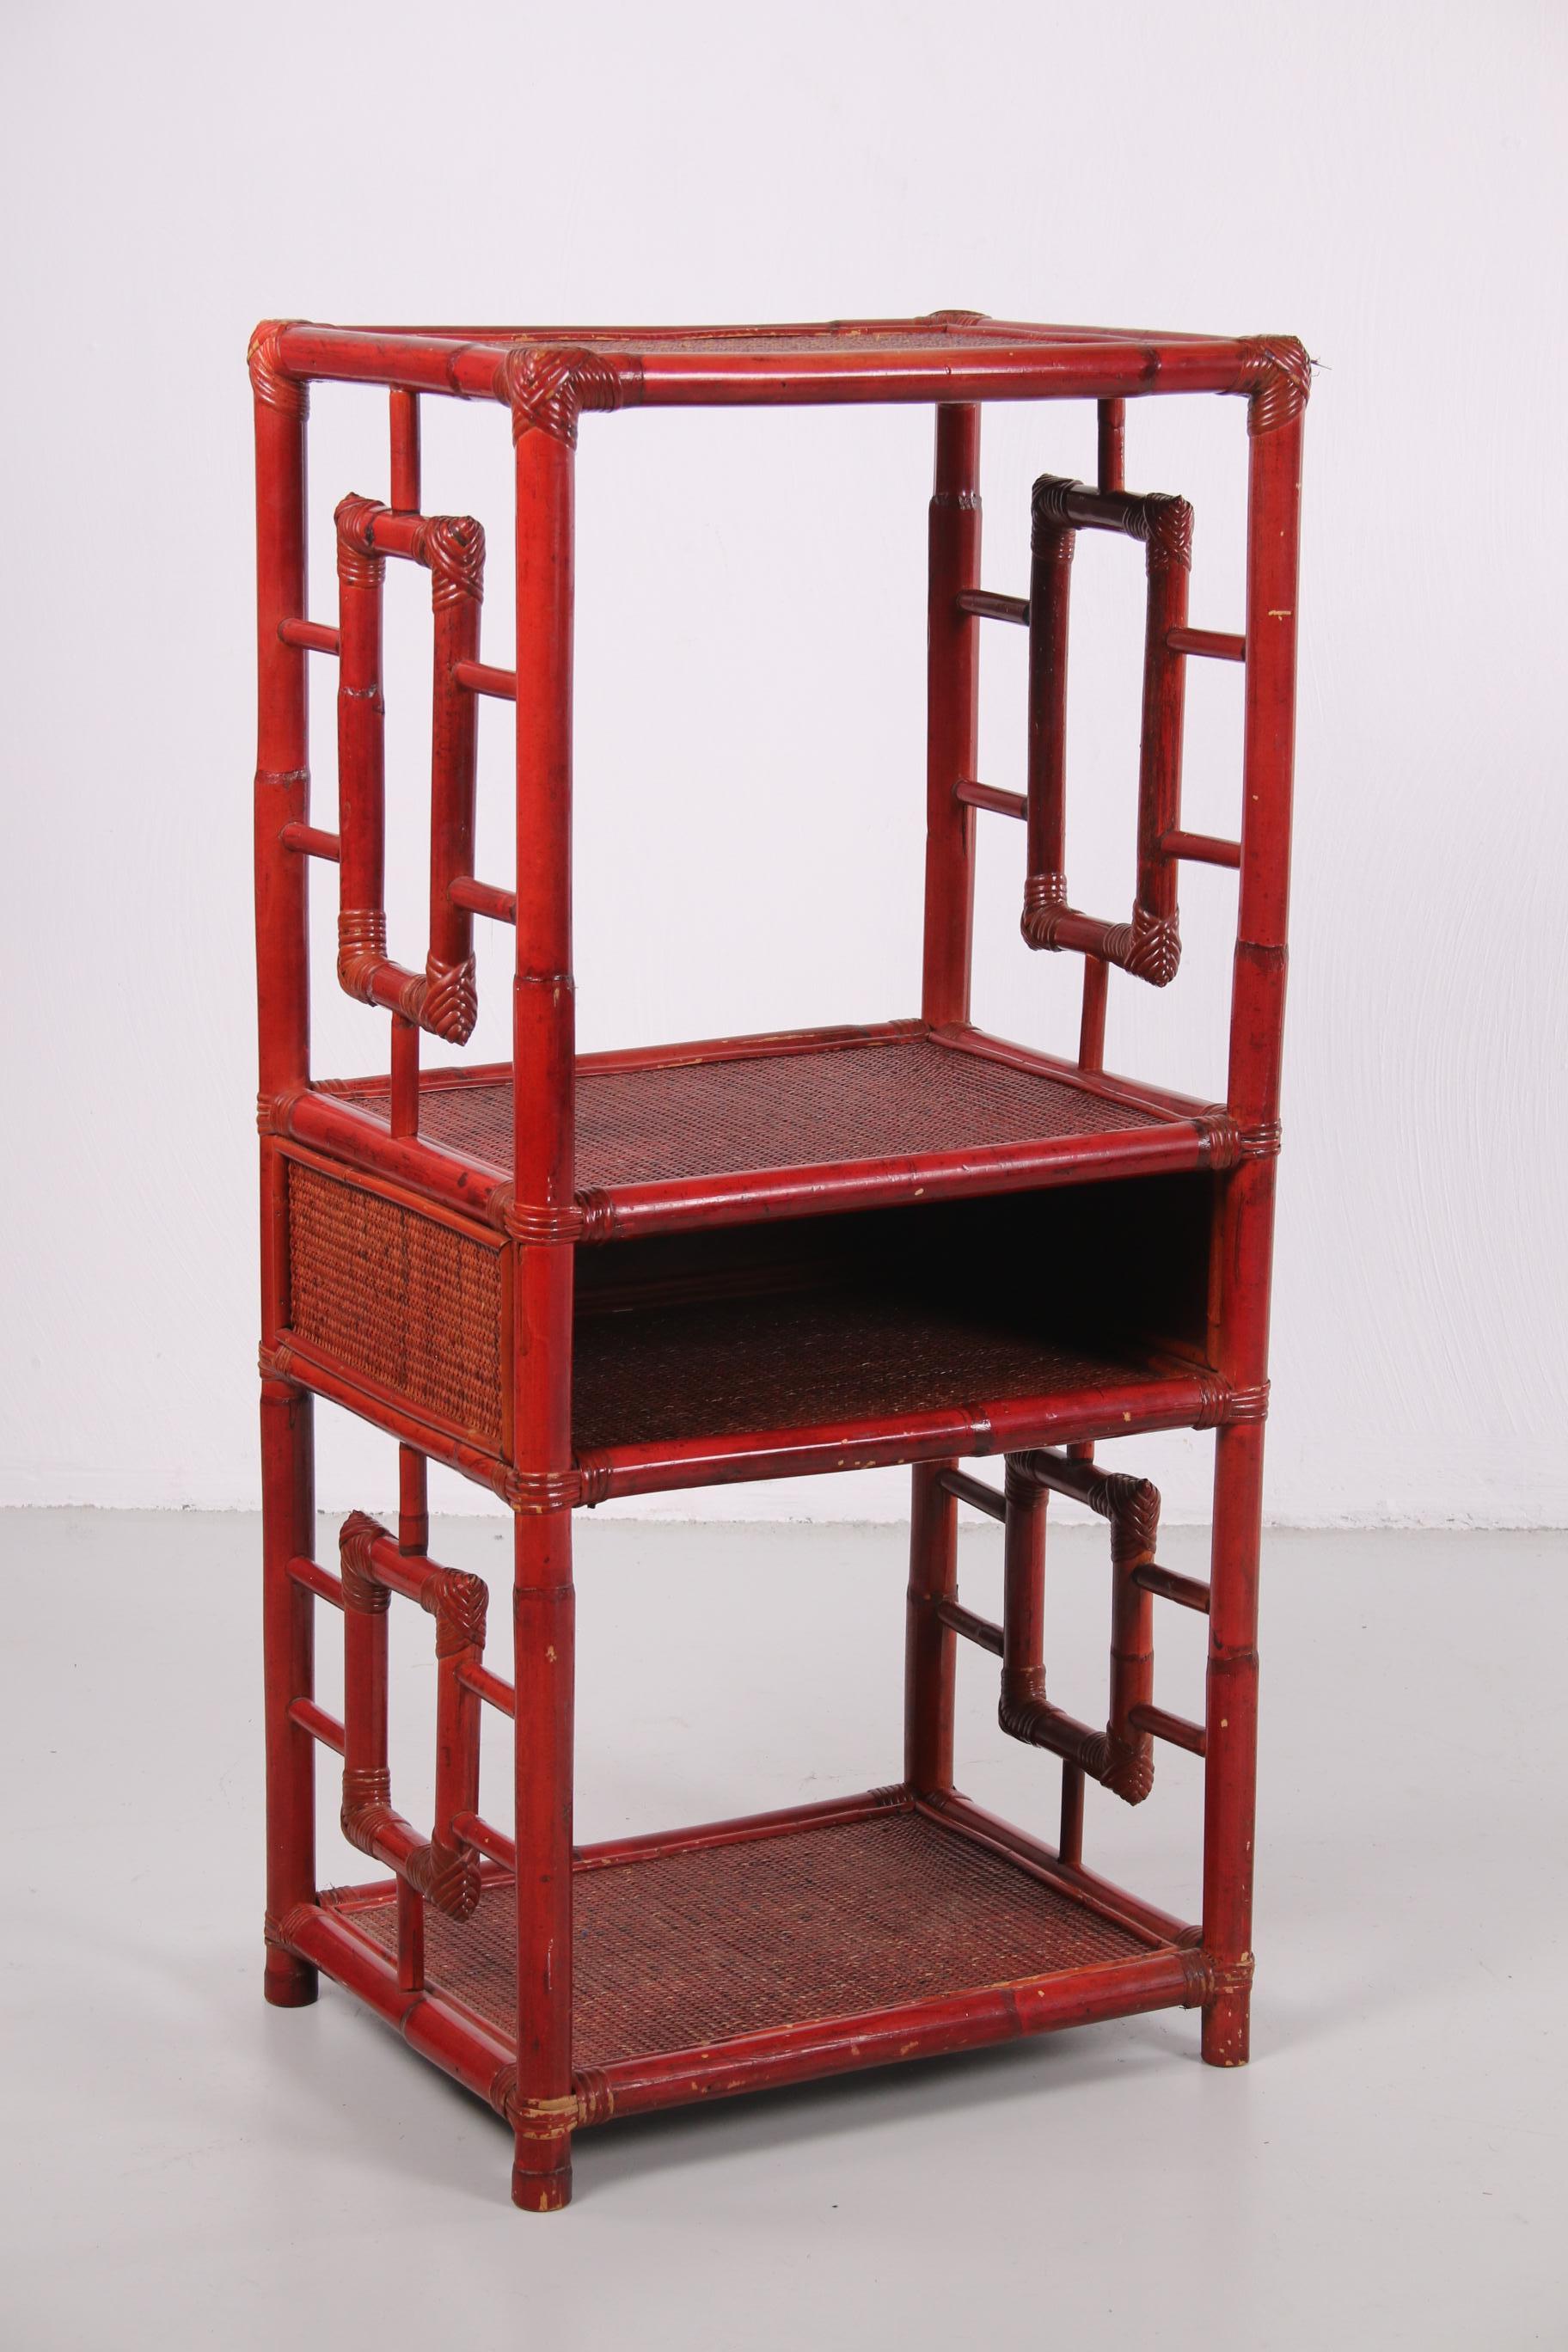 his is a very nice bamboo wall rack or room divider, the color is old red.

This rack is probably made in China around 1900.

Can be used for various things to place books or to make a small partition somewhere.

It has 4 trays and is made of